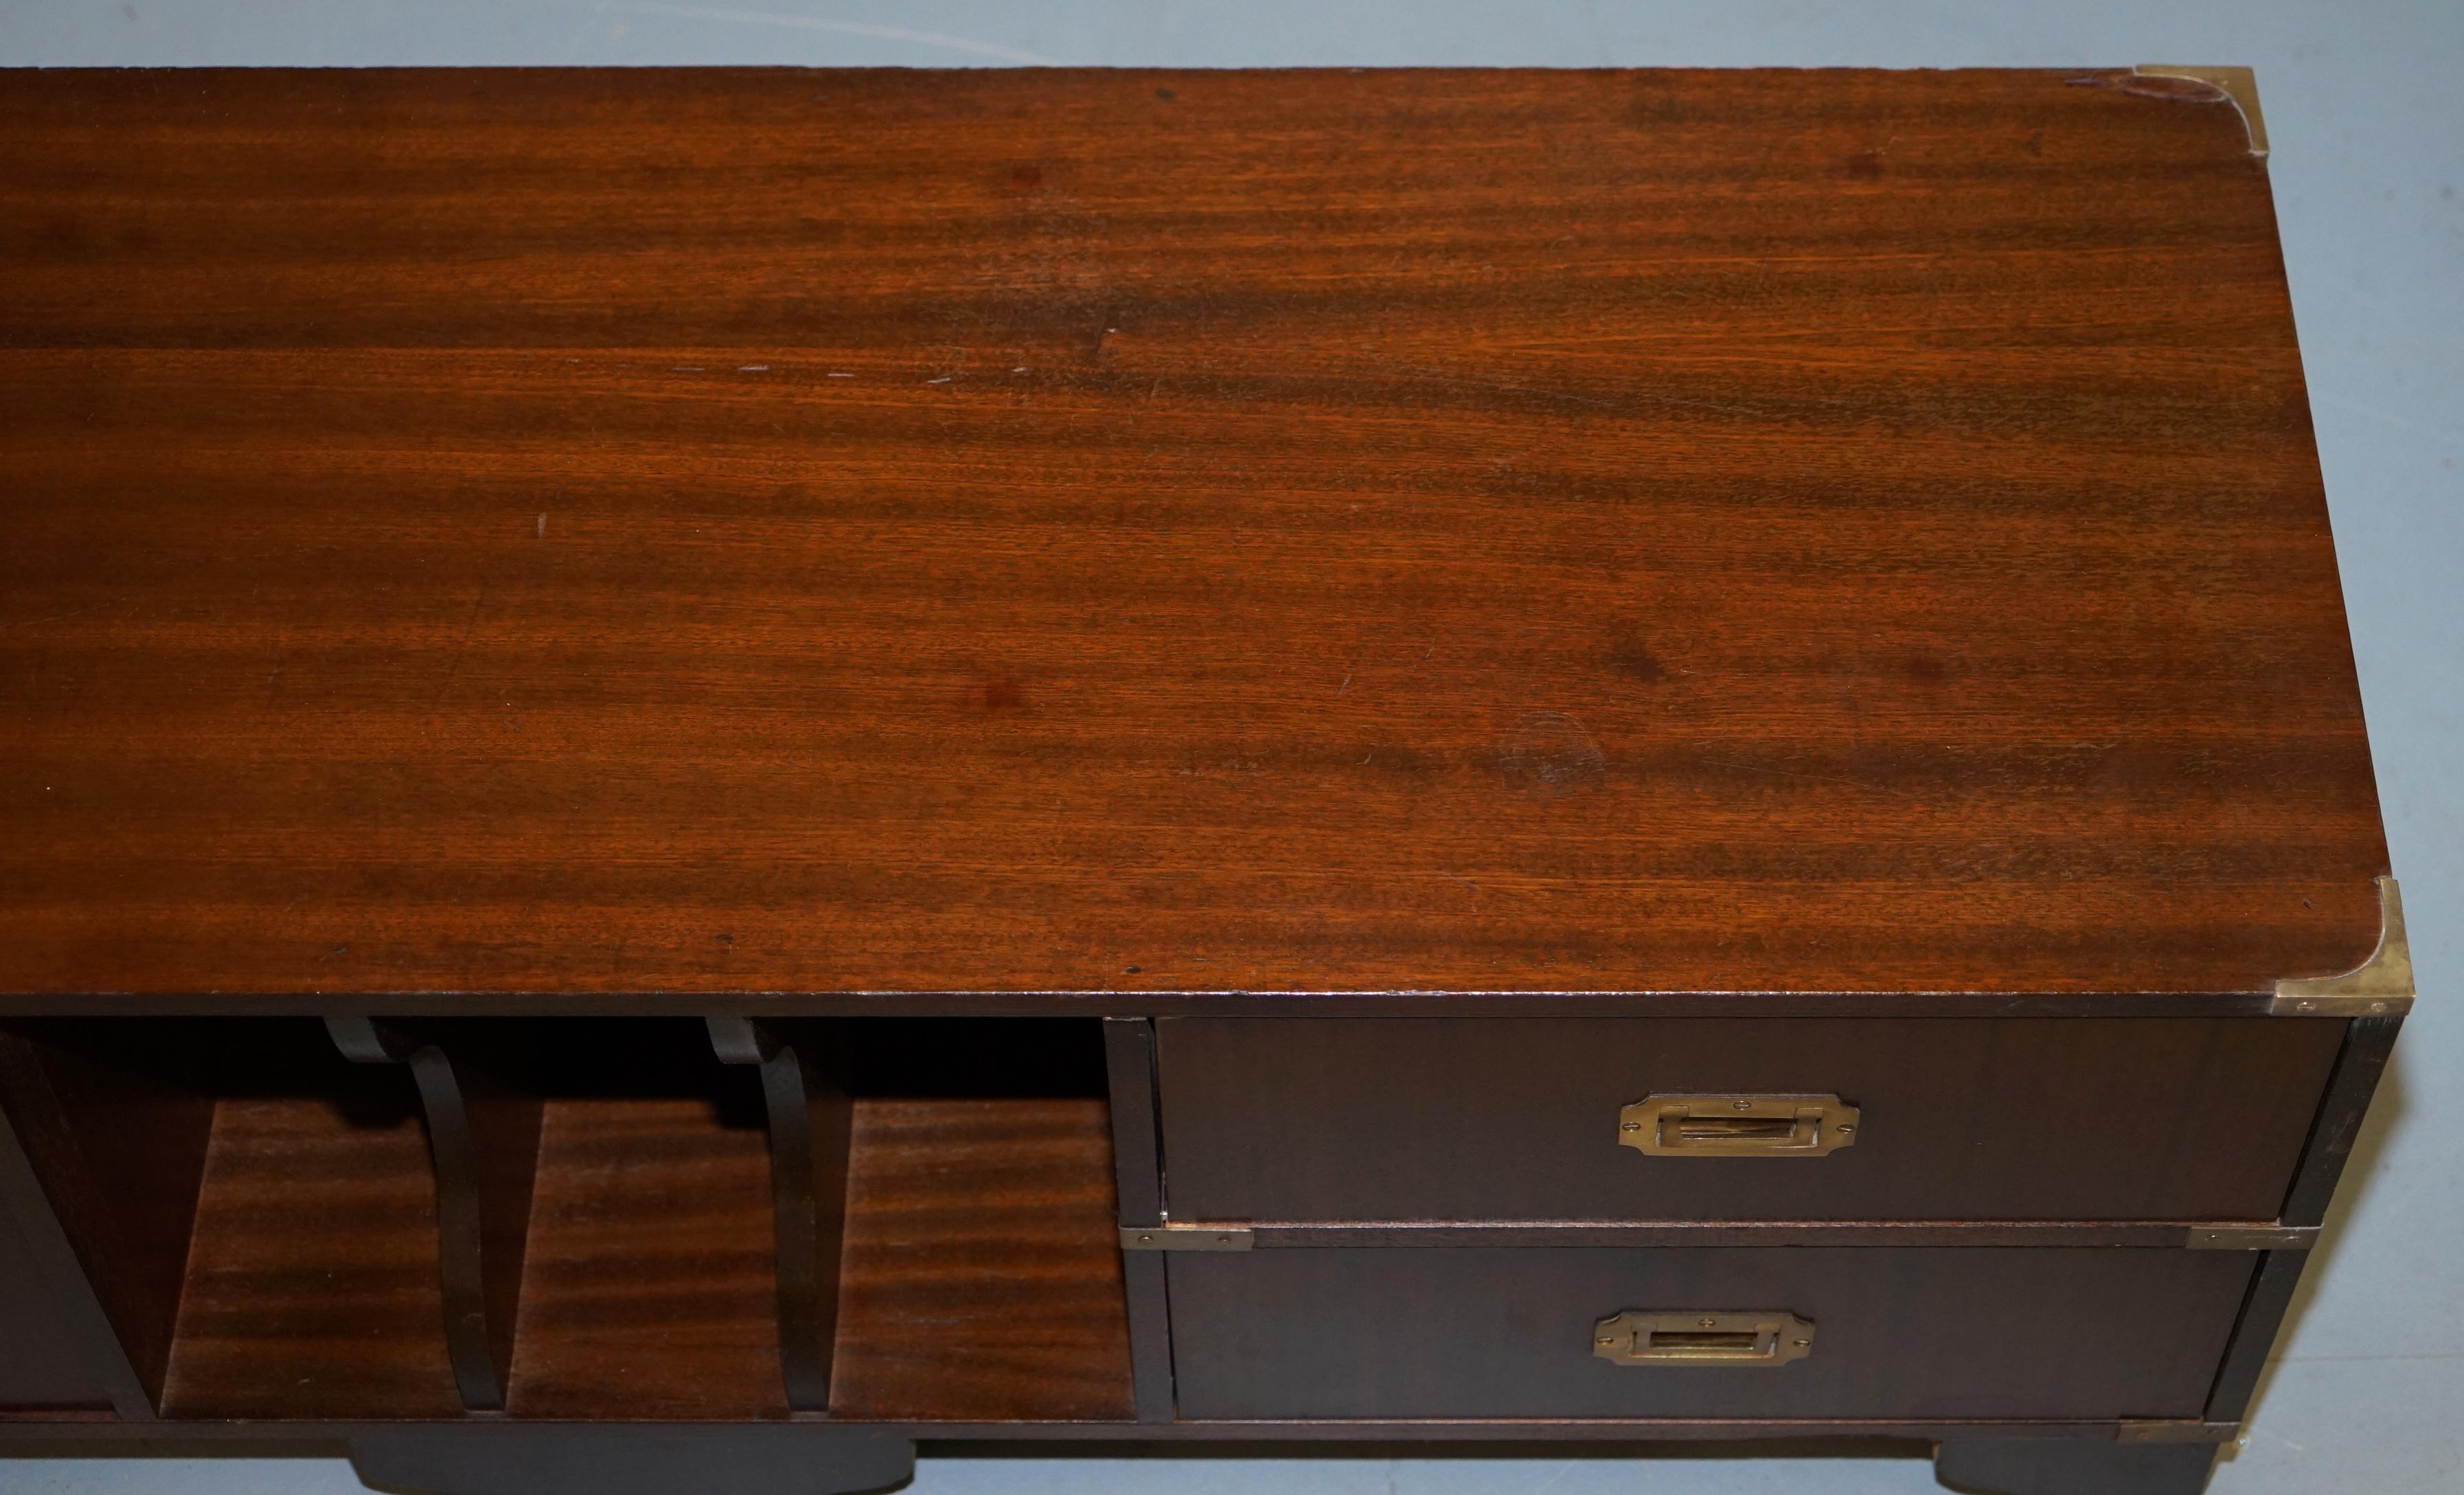 20th Century Rare Military Campaign Hardwood Record Player TV Media Stand Table with Drawers